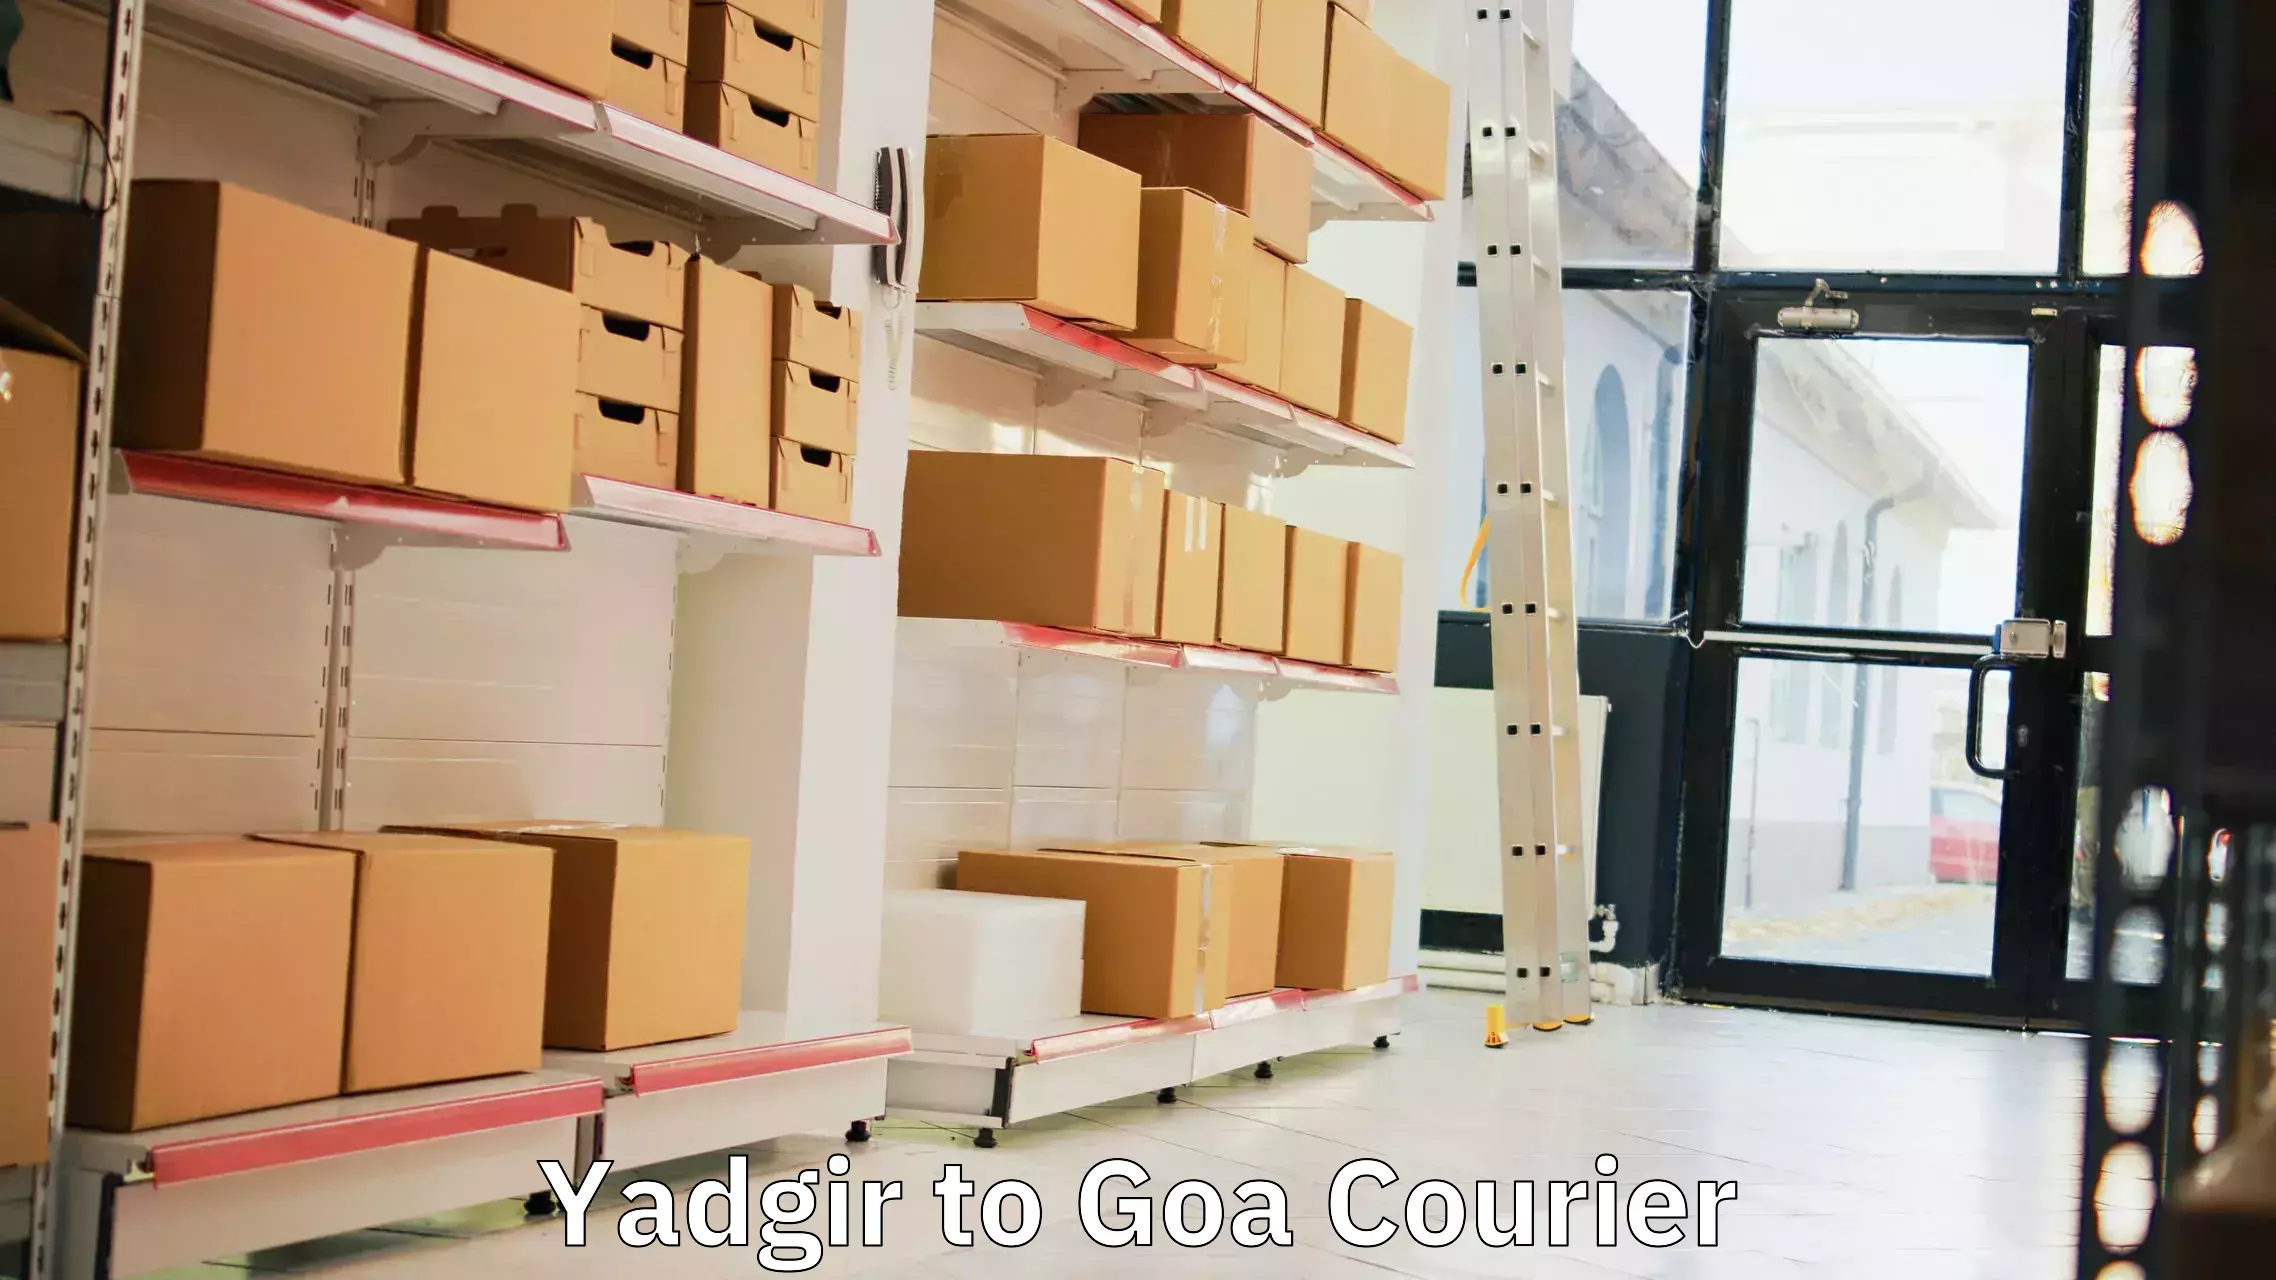 Courier service innovation Yadgir to Margao